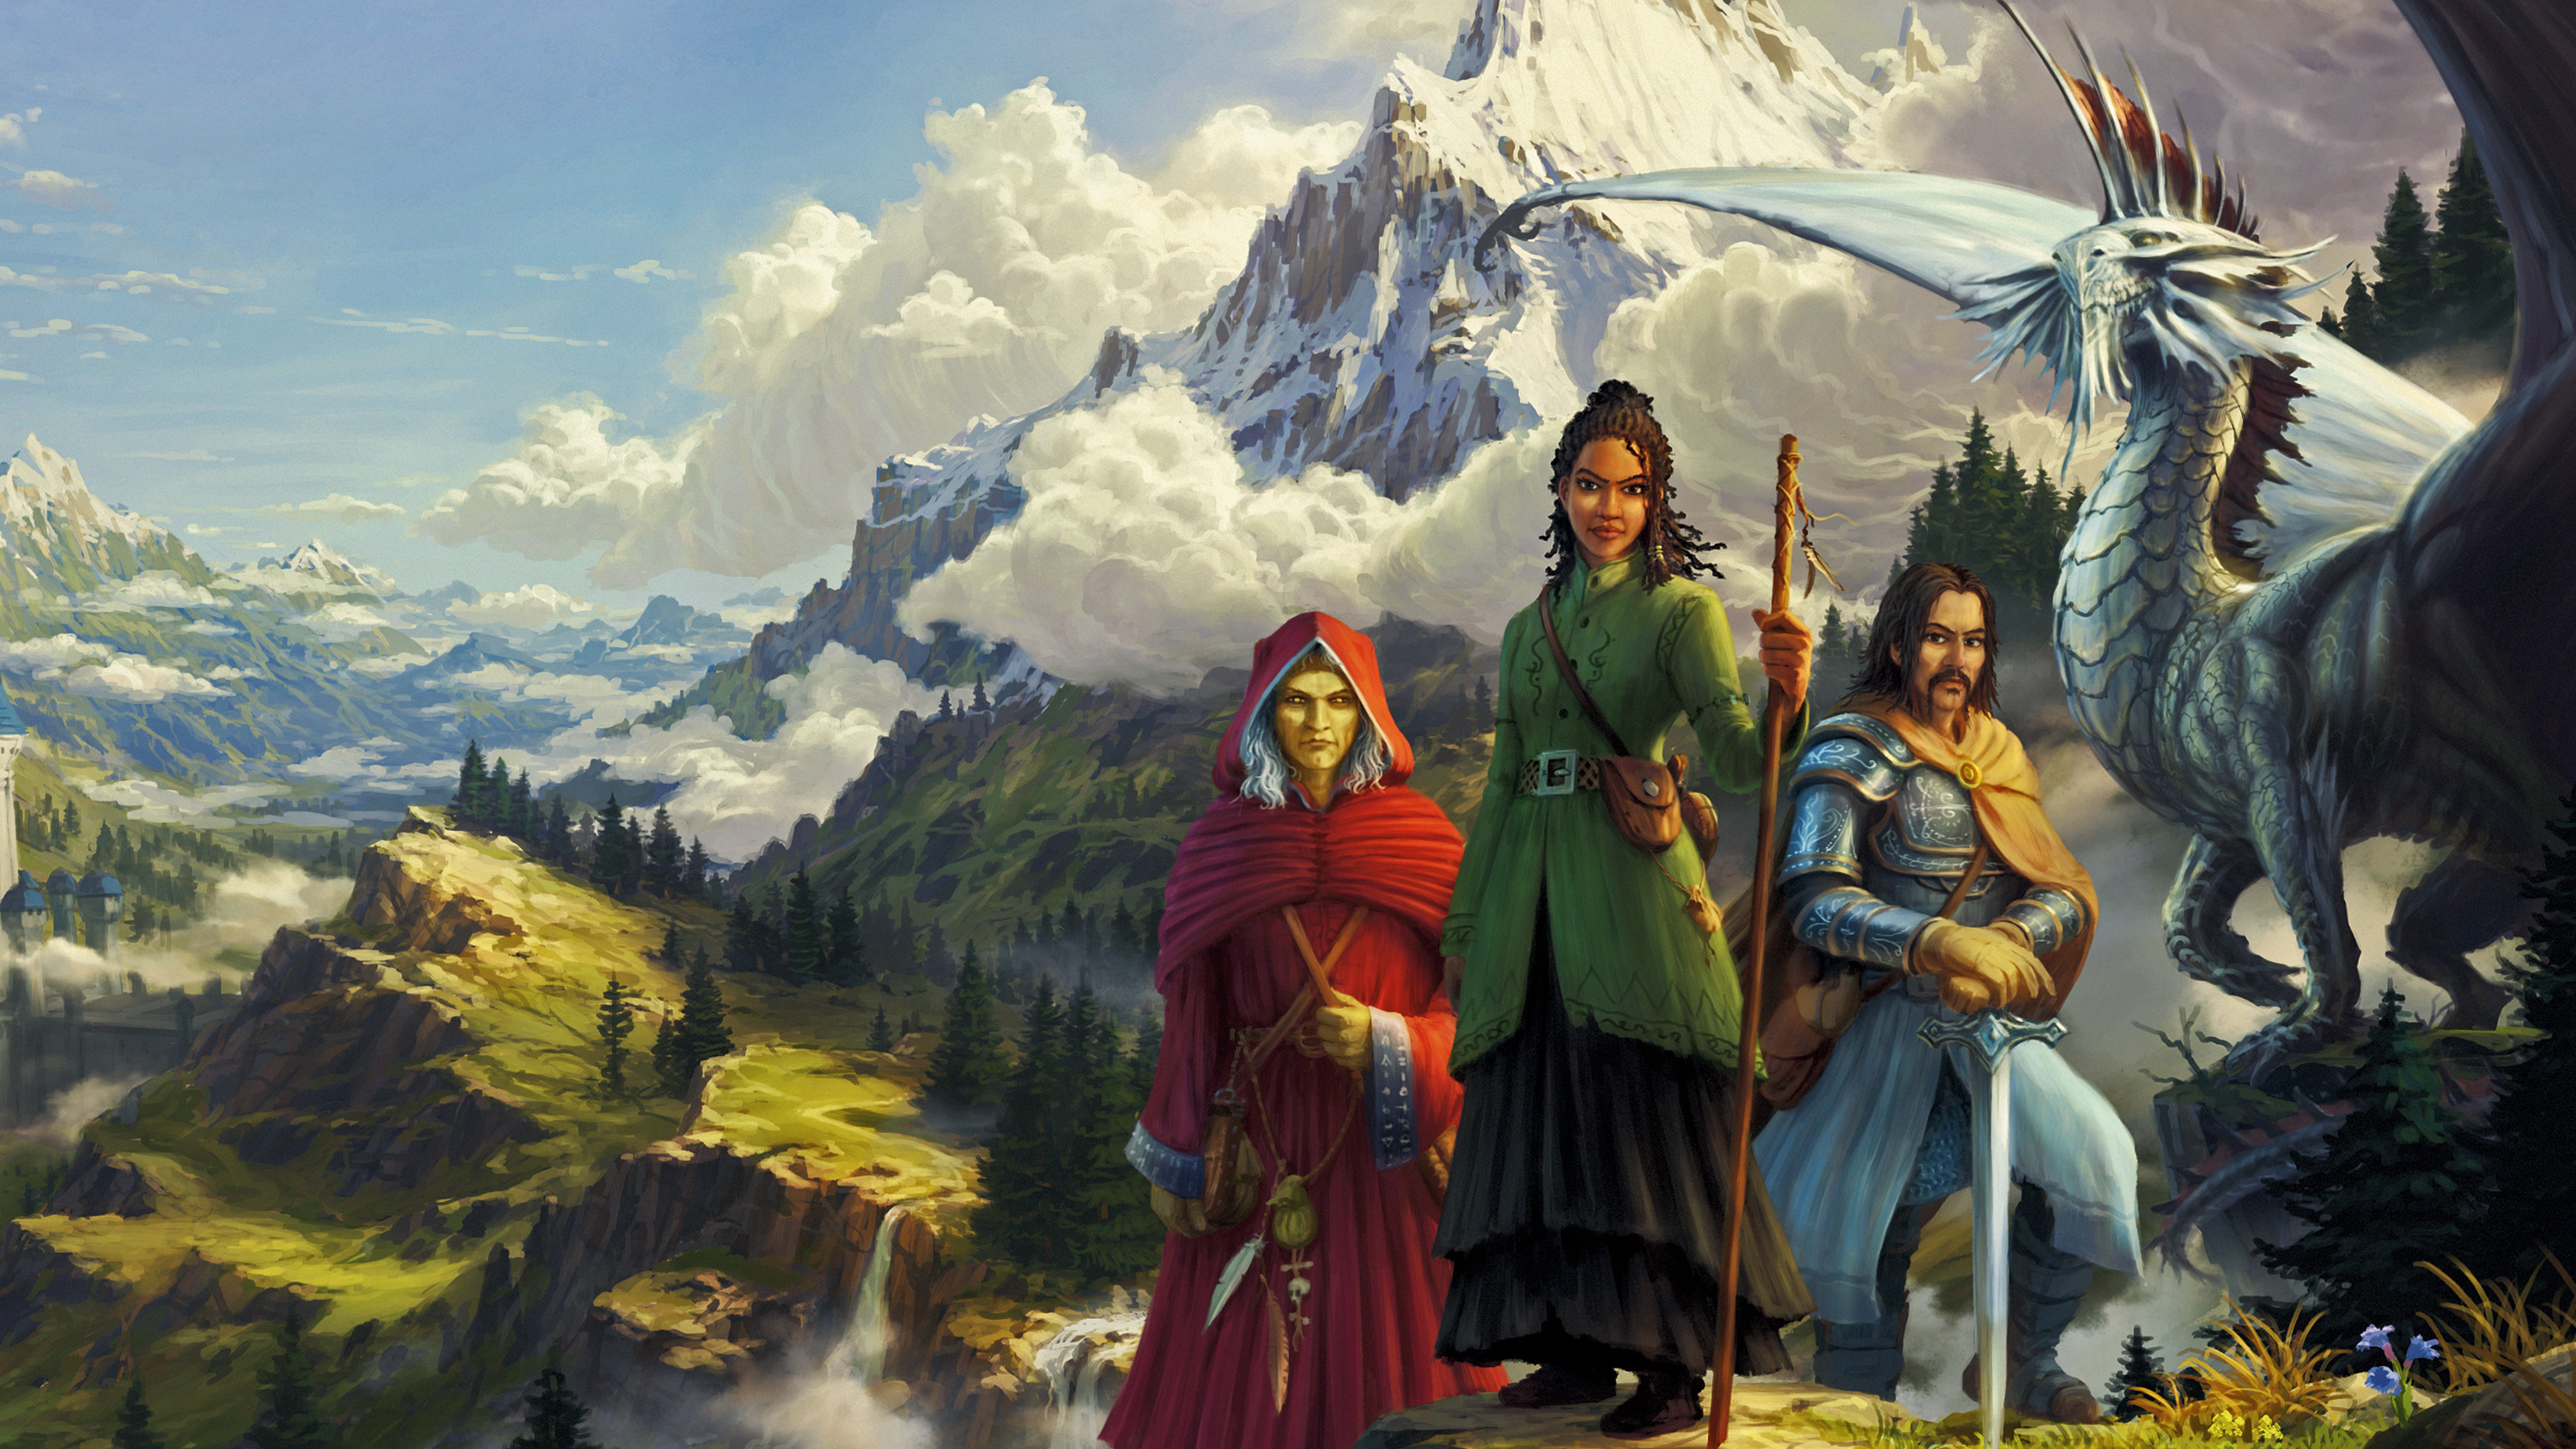 Destina, a young Black woman from Solamnia, wield’s a kender’s staff. She is flanked by Raistlin in red robes and Sturm wearing plate armor of Solamnia. Behind them is a silver dragon with wings outstretched. Mountains rise on the horizon.